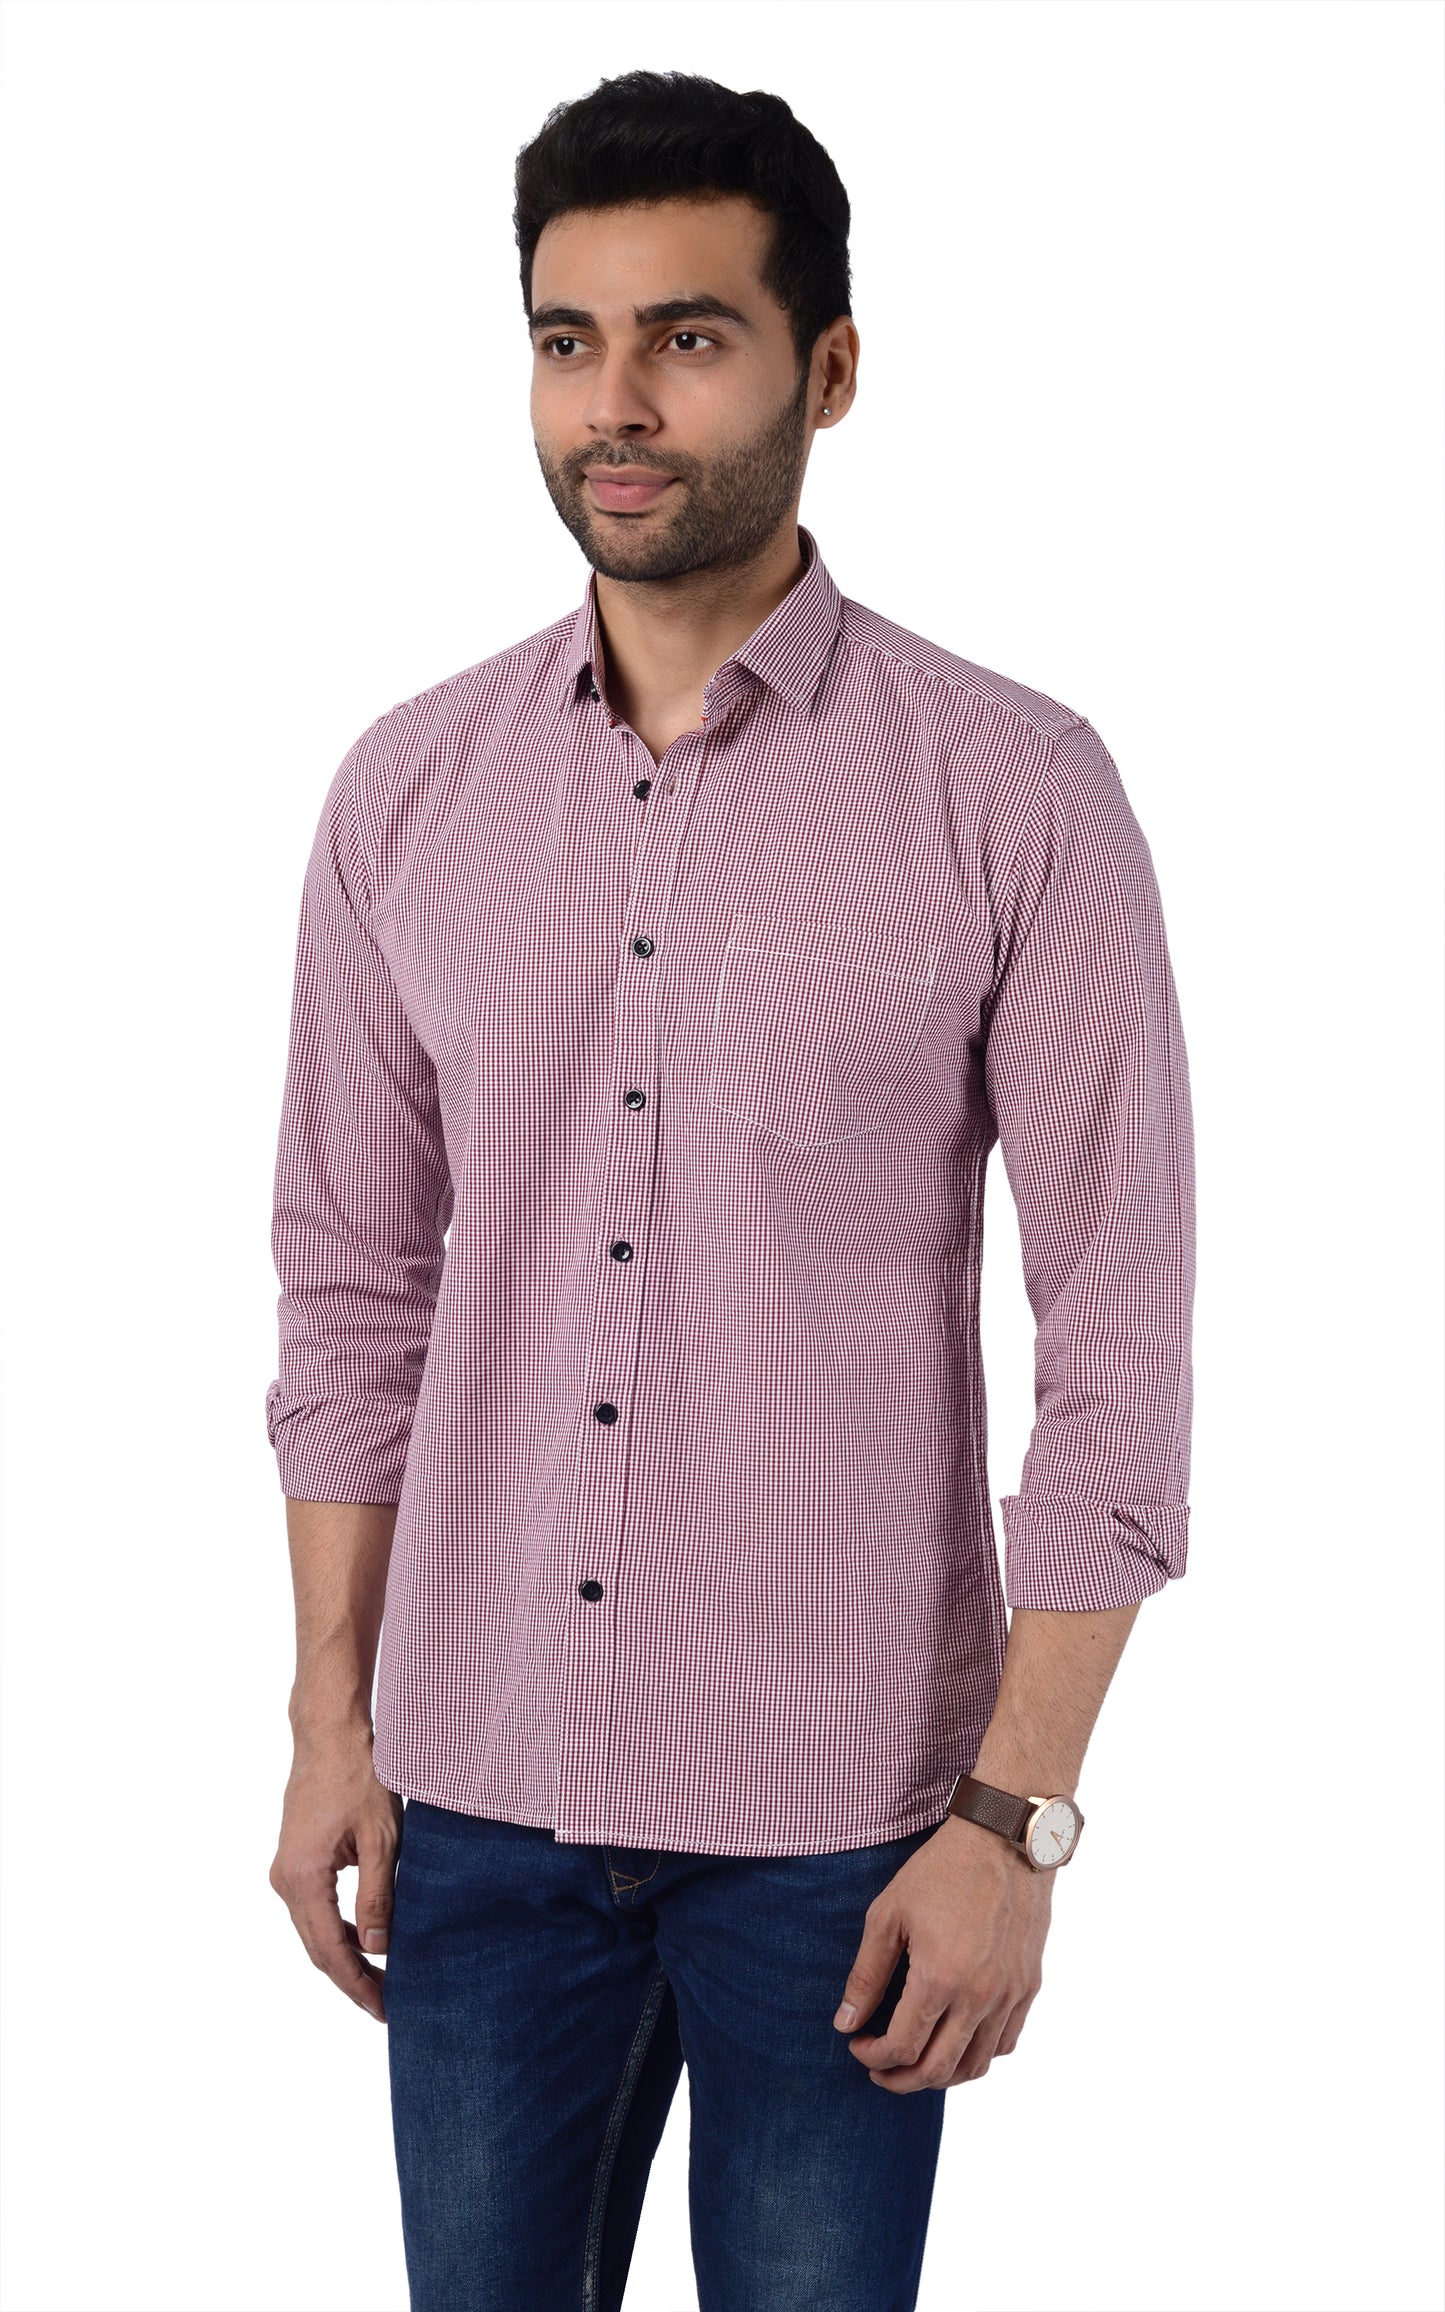 5thanfold Men's Casual  Pure Cotton Full Sleeve Checkered Pink Slim Fit Shirt